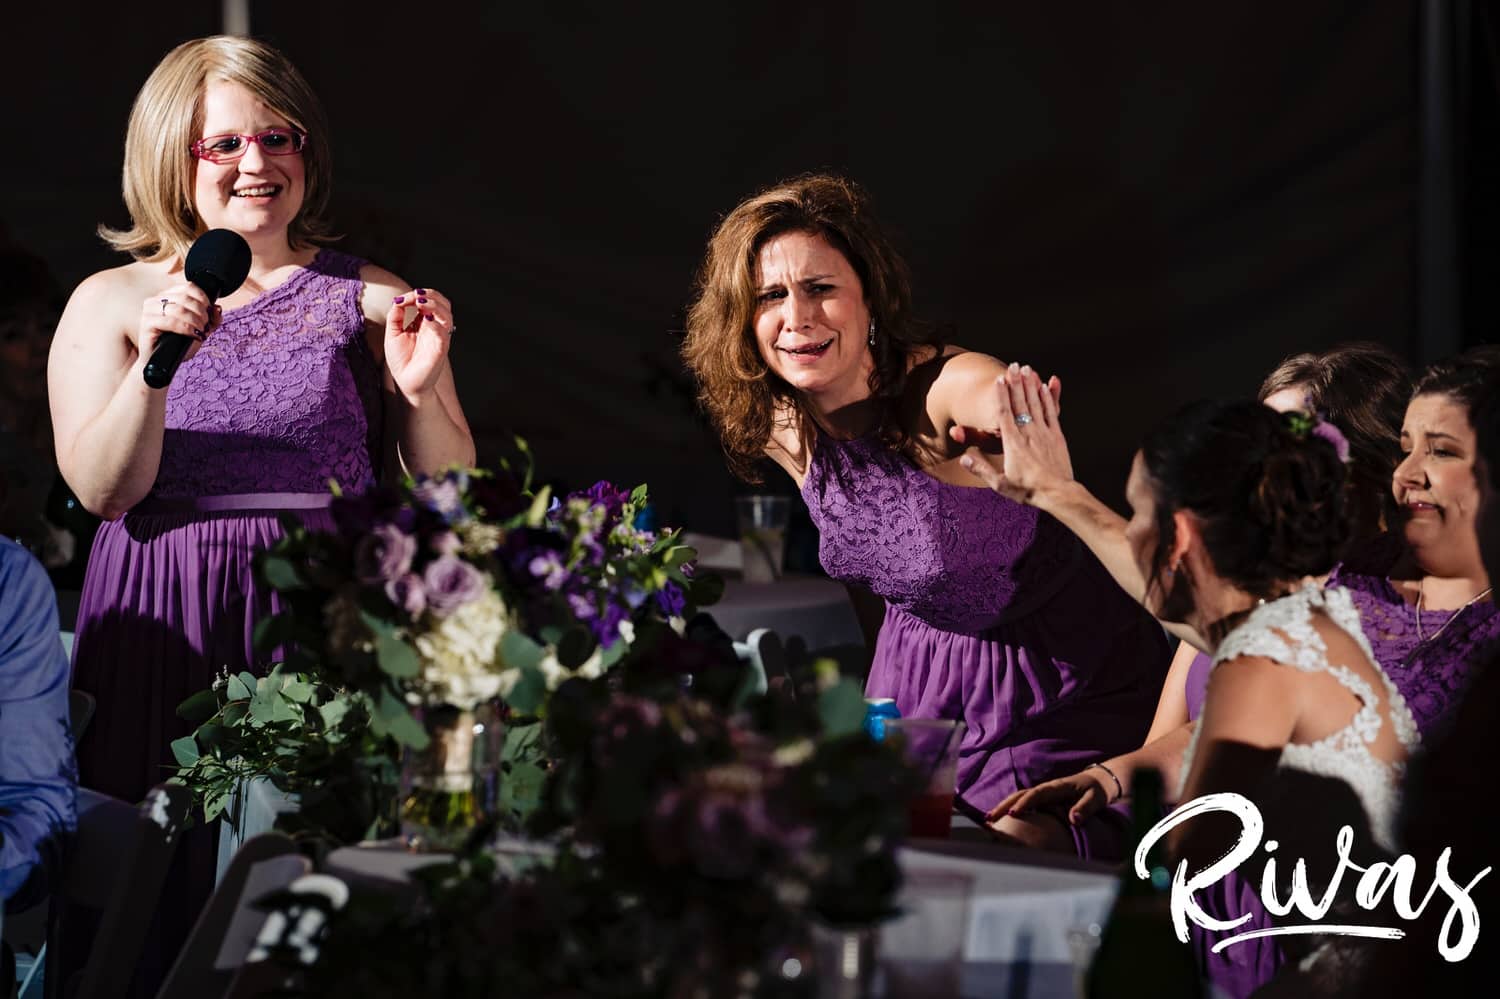 A colorful, candid picture of a bride high-fiving her bridesmaid as she toasts her during a rainy wedding reception at The Bowery in Kansas City. 